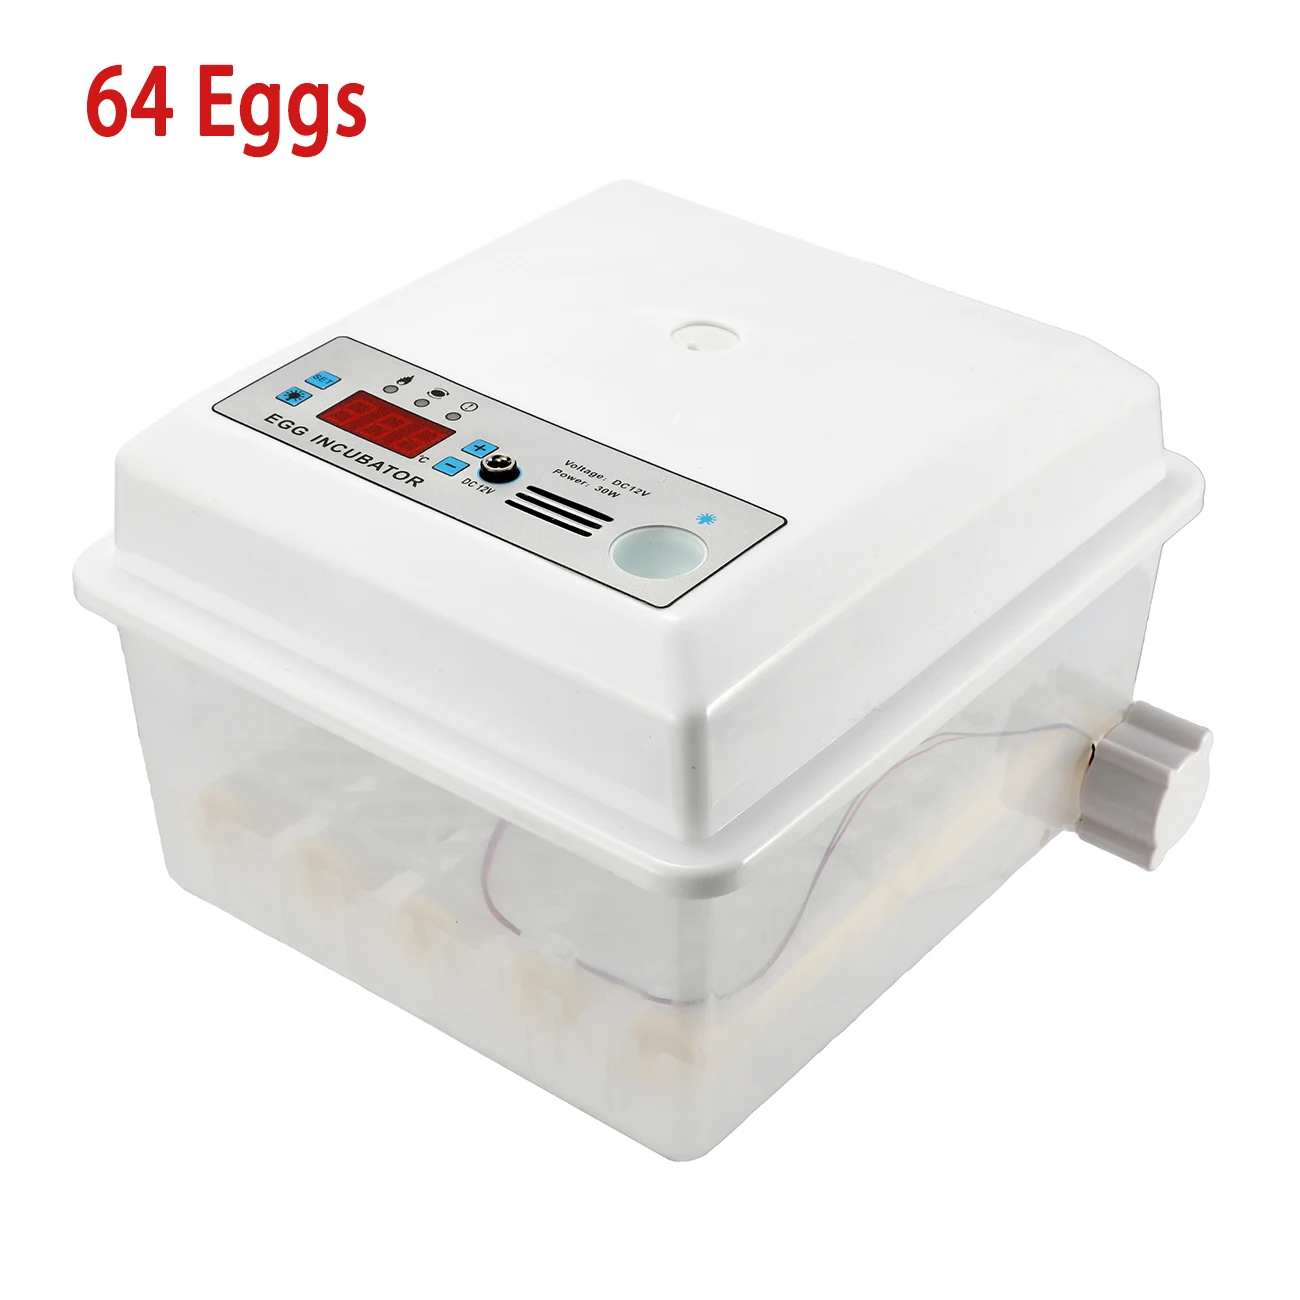 

64 Egg Brooder Hatchery Incubator Automatic Incubatores with Turner for Farm Hatching Goose Quail Chicken Eggs Hatcher Machine